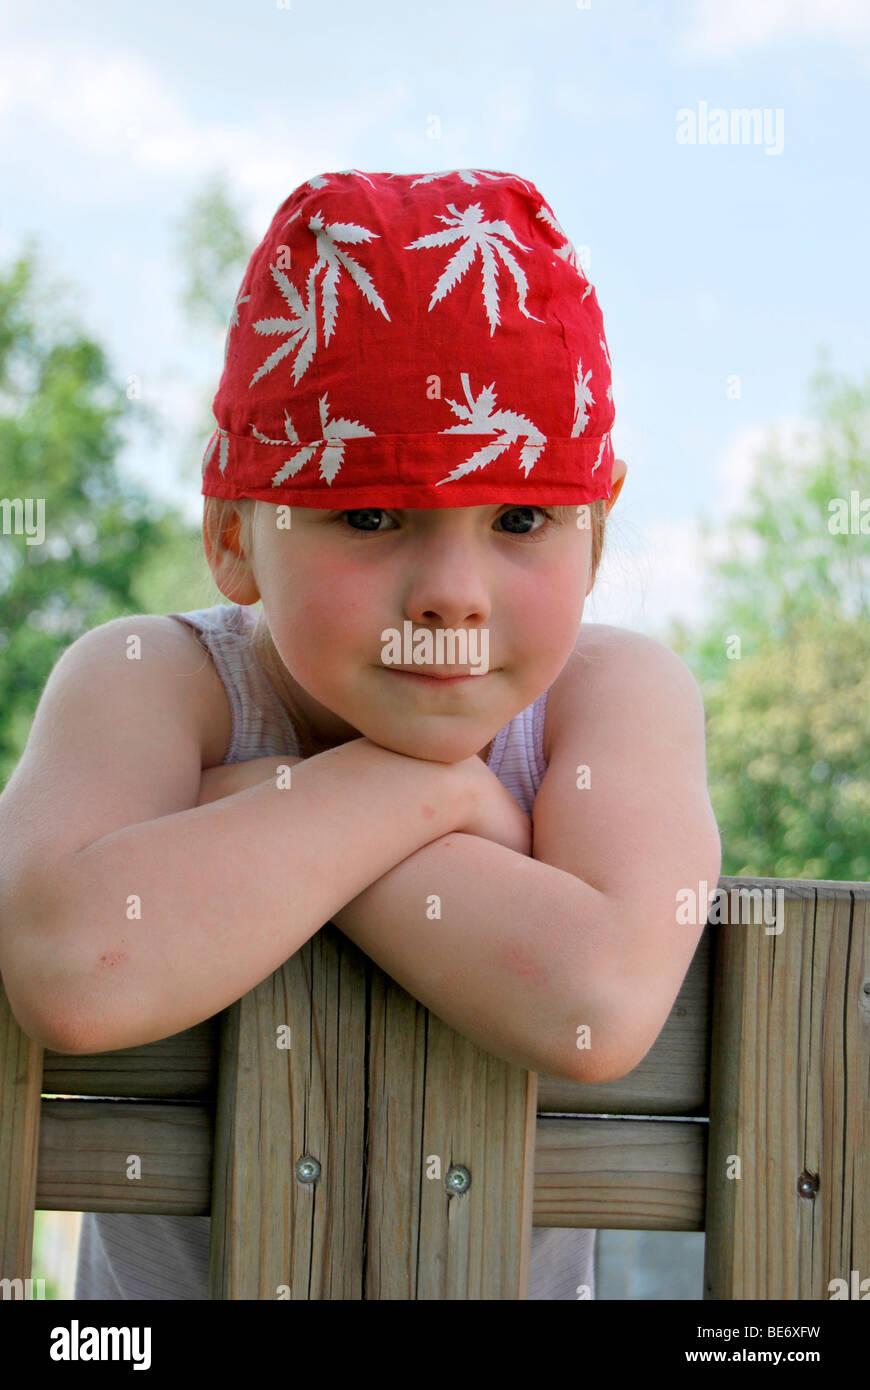 Girl, 5, wearing a red headscarf looking interested while hanging over a garden fence like a young rascal Stock Photo